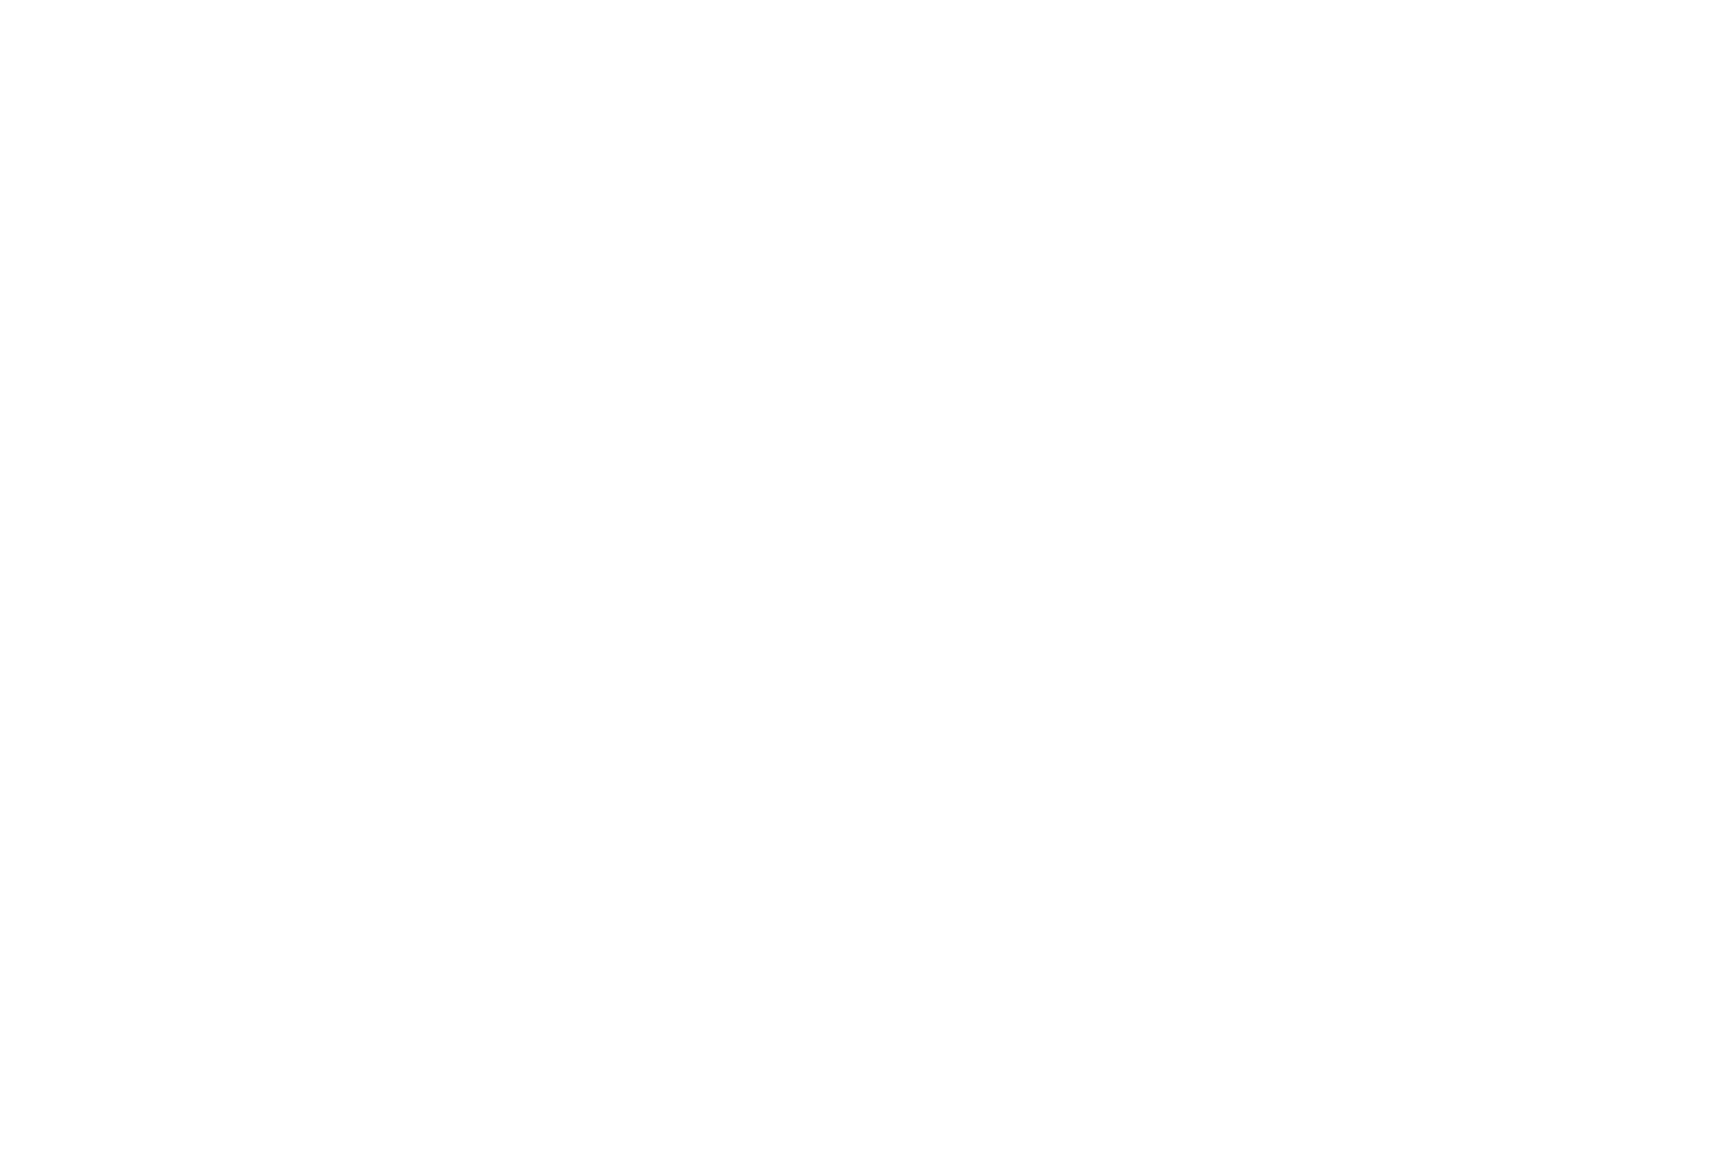 OFFICIAL SELECTION - Film Invasion Los Angeles - Find Happy 2017.png